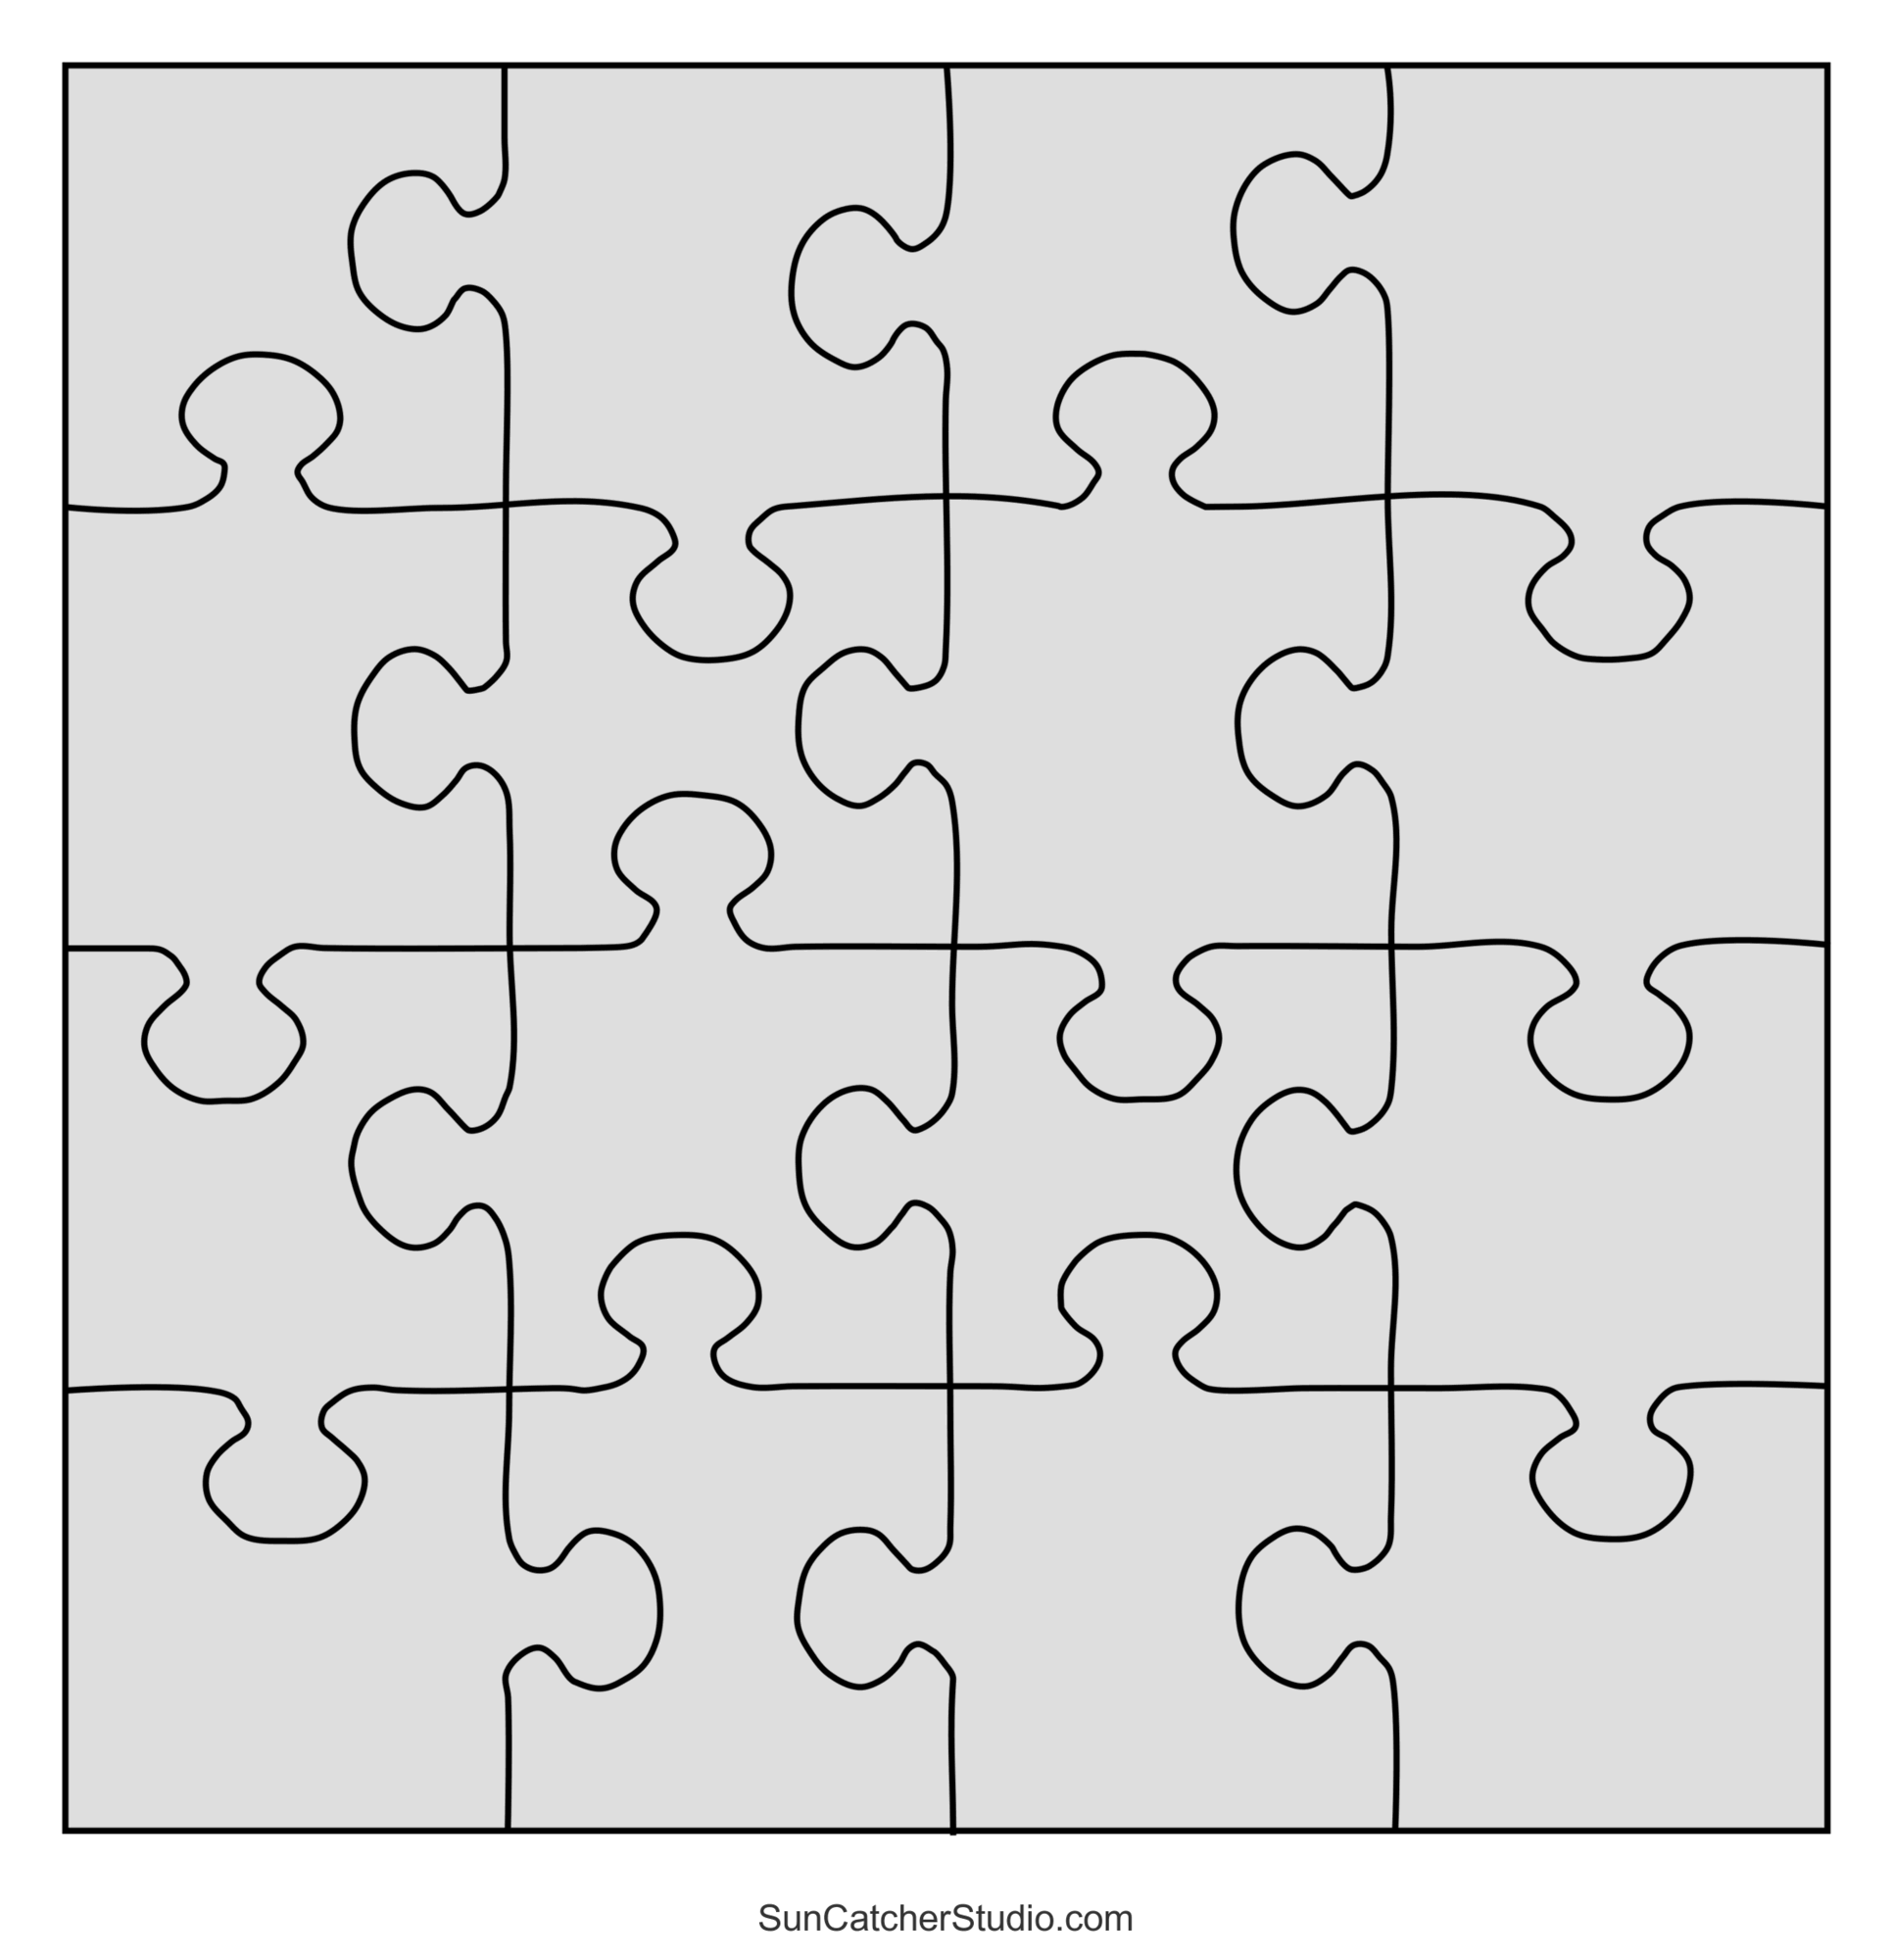 DIY JigSaw Puzzles (Free Patterns, Stencils & Templates) – DIY Projects ...